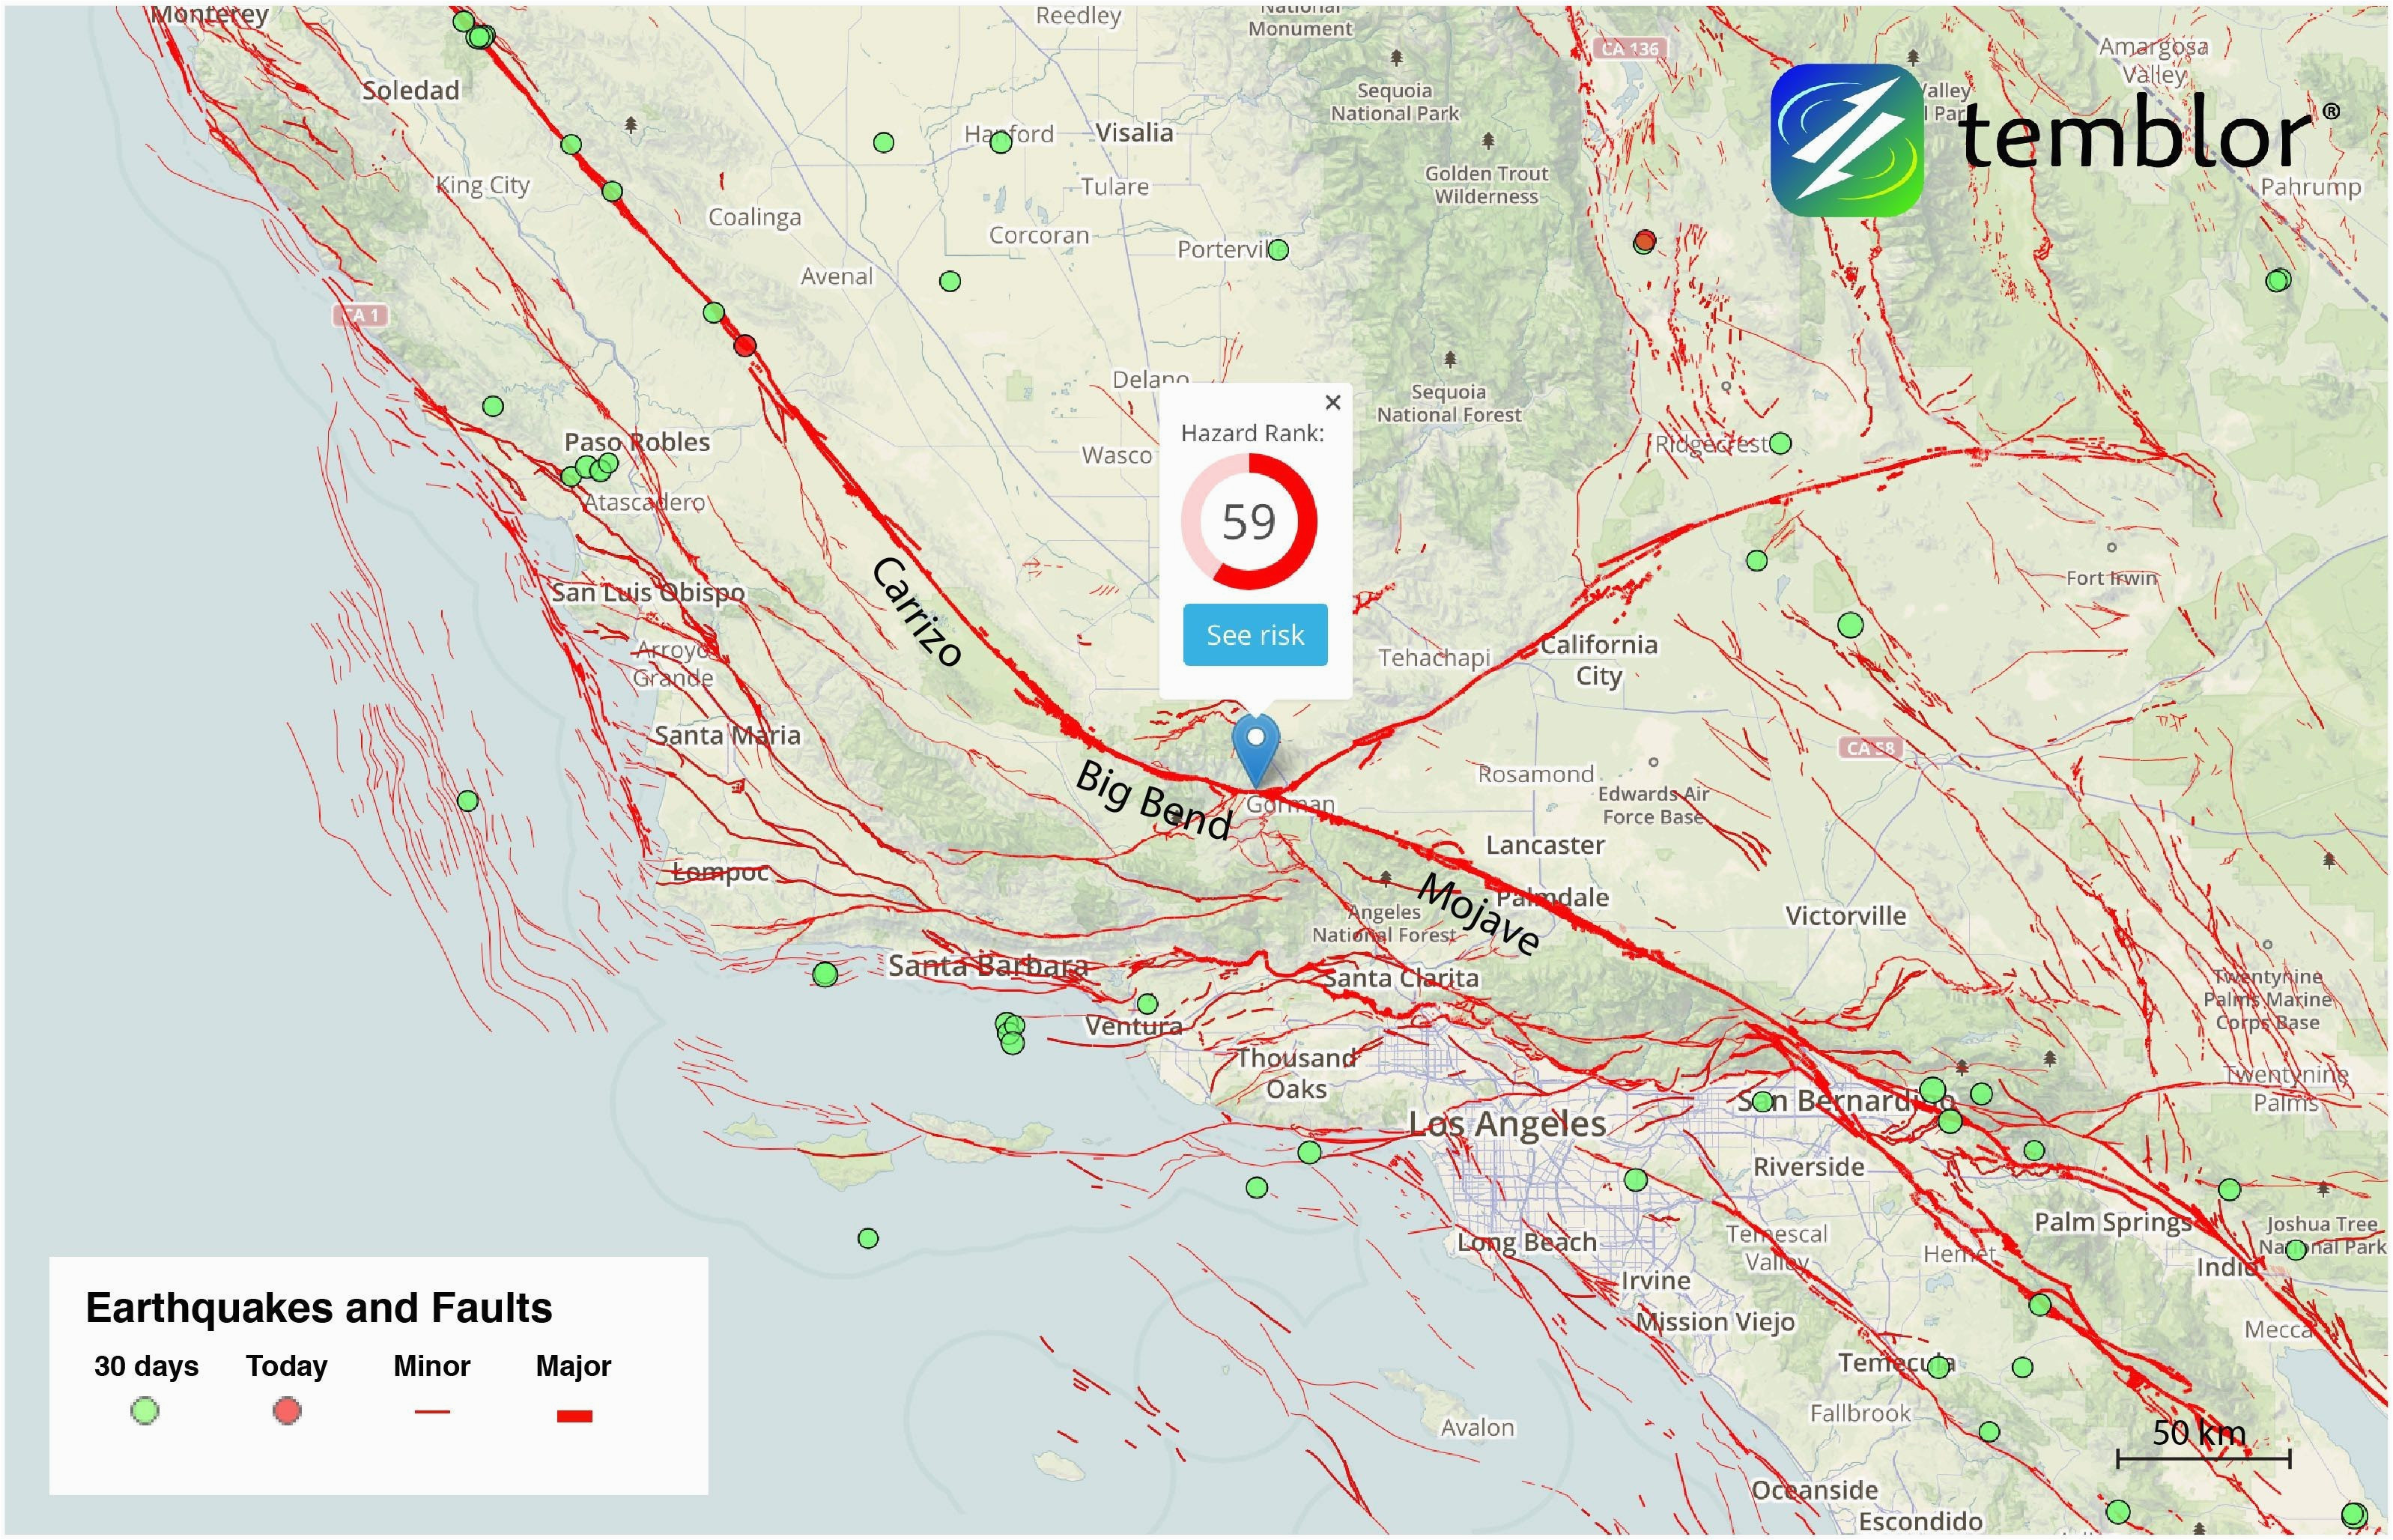 Southern California Fault Lines Map Traffic Map southern California Fresh Map Major Us Fault Lines Fault